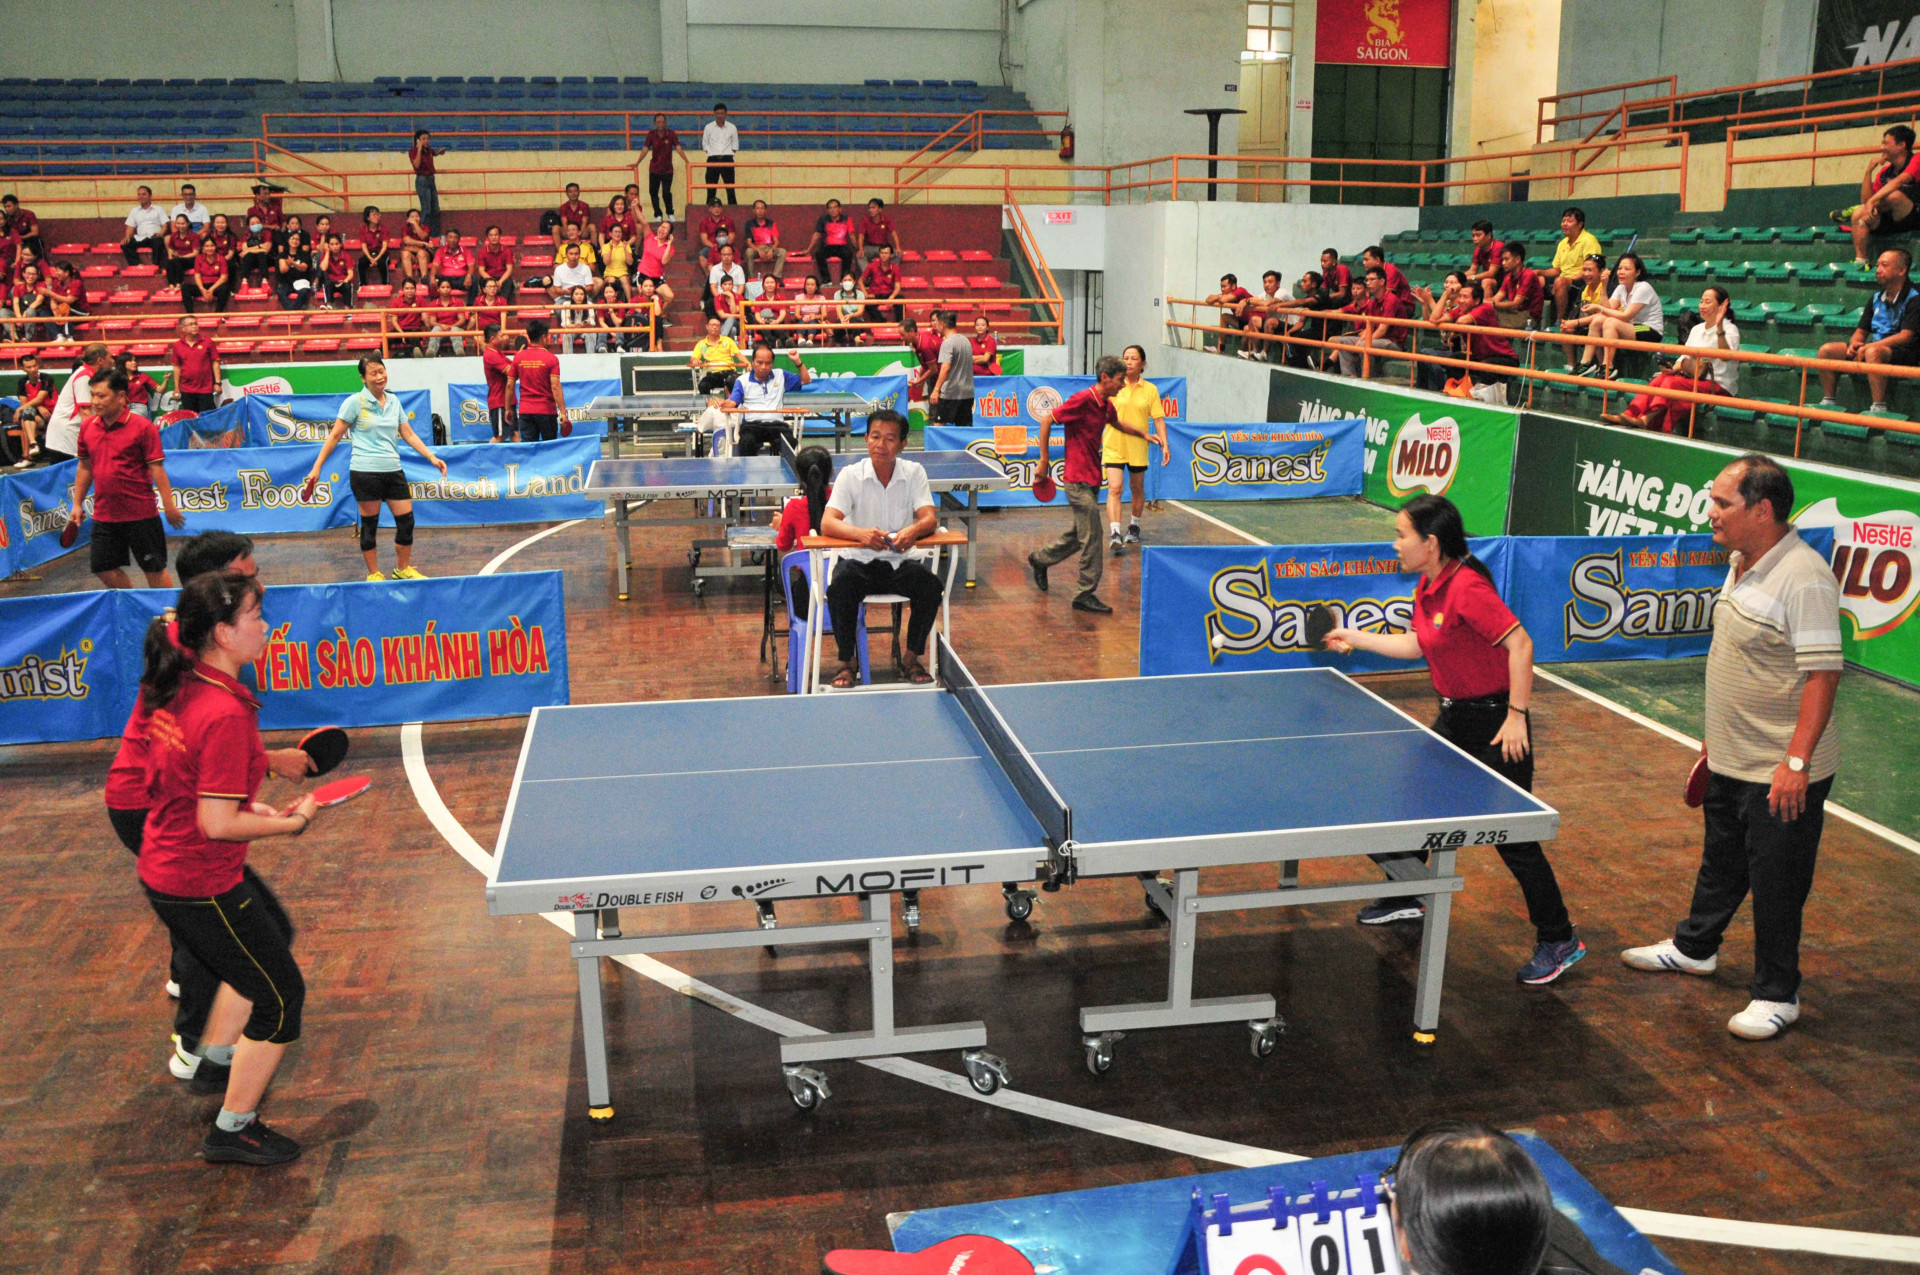 Mixed doubles’ table tennis